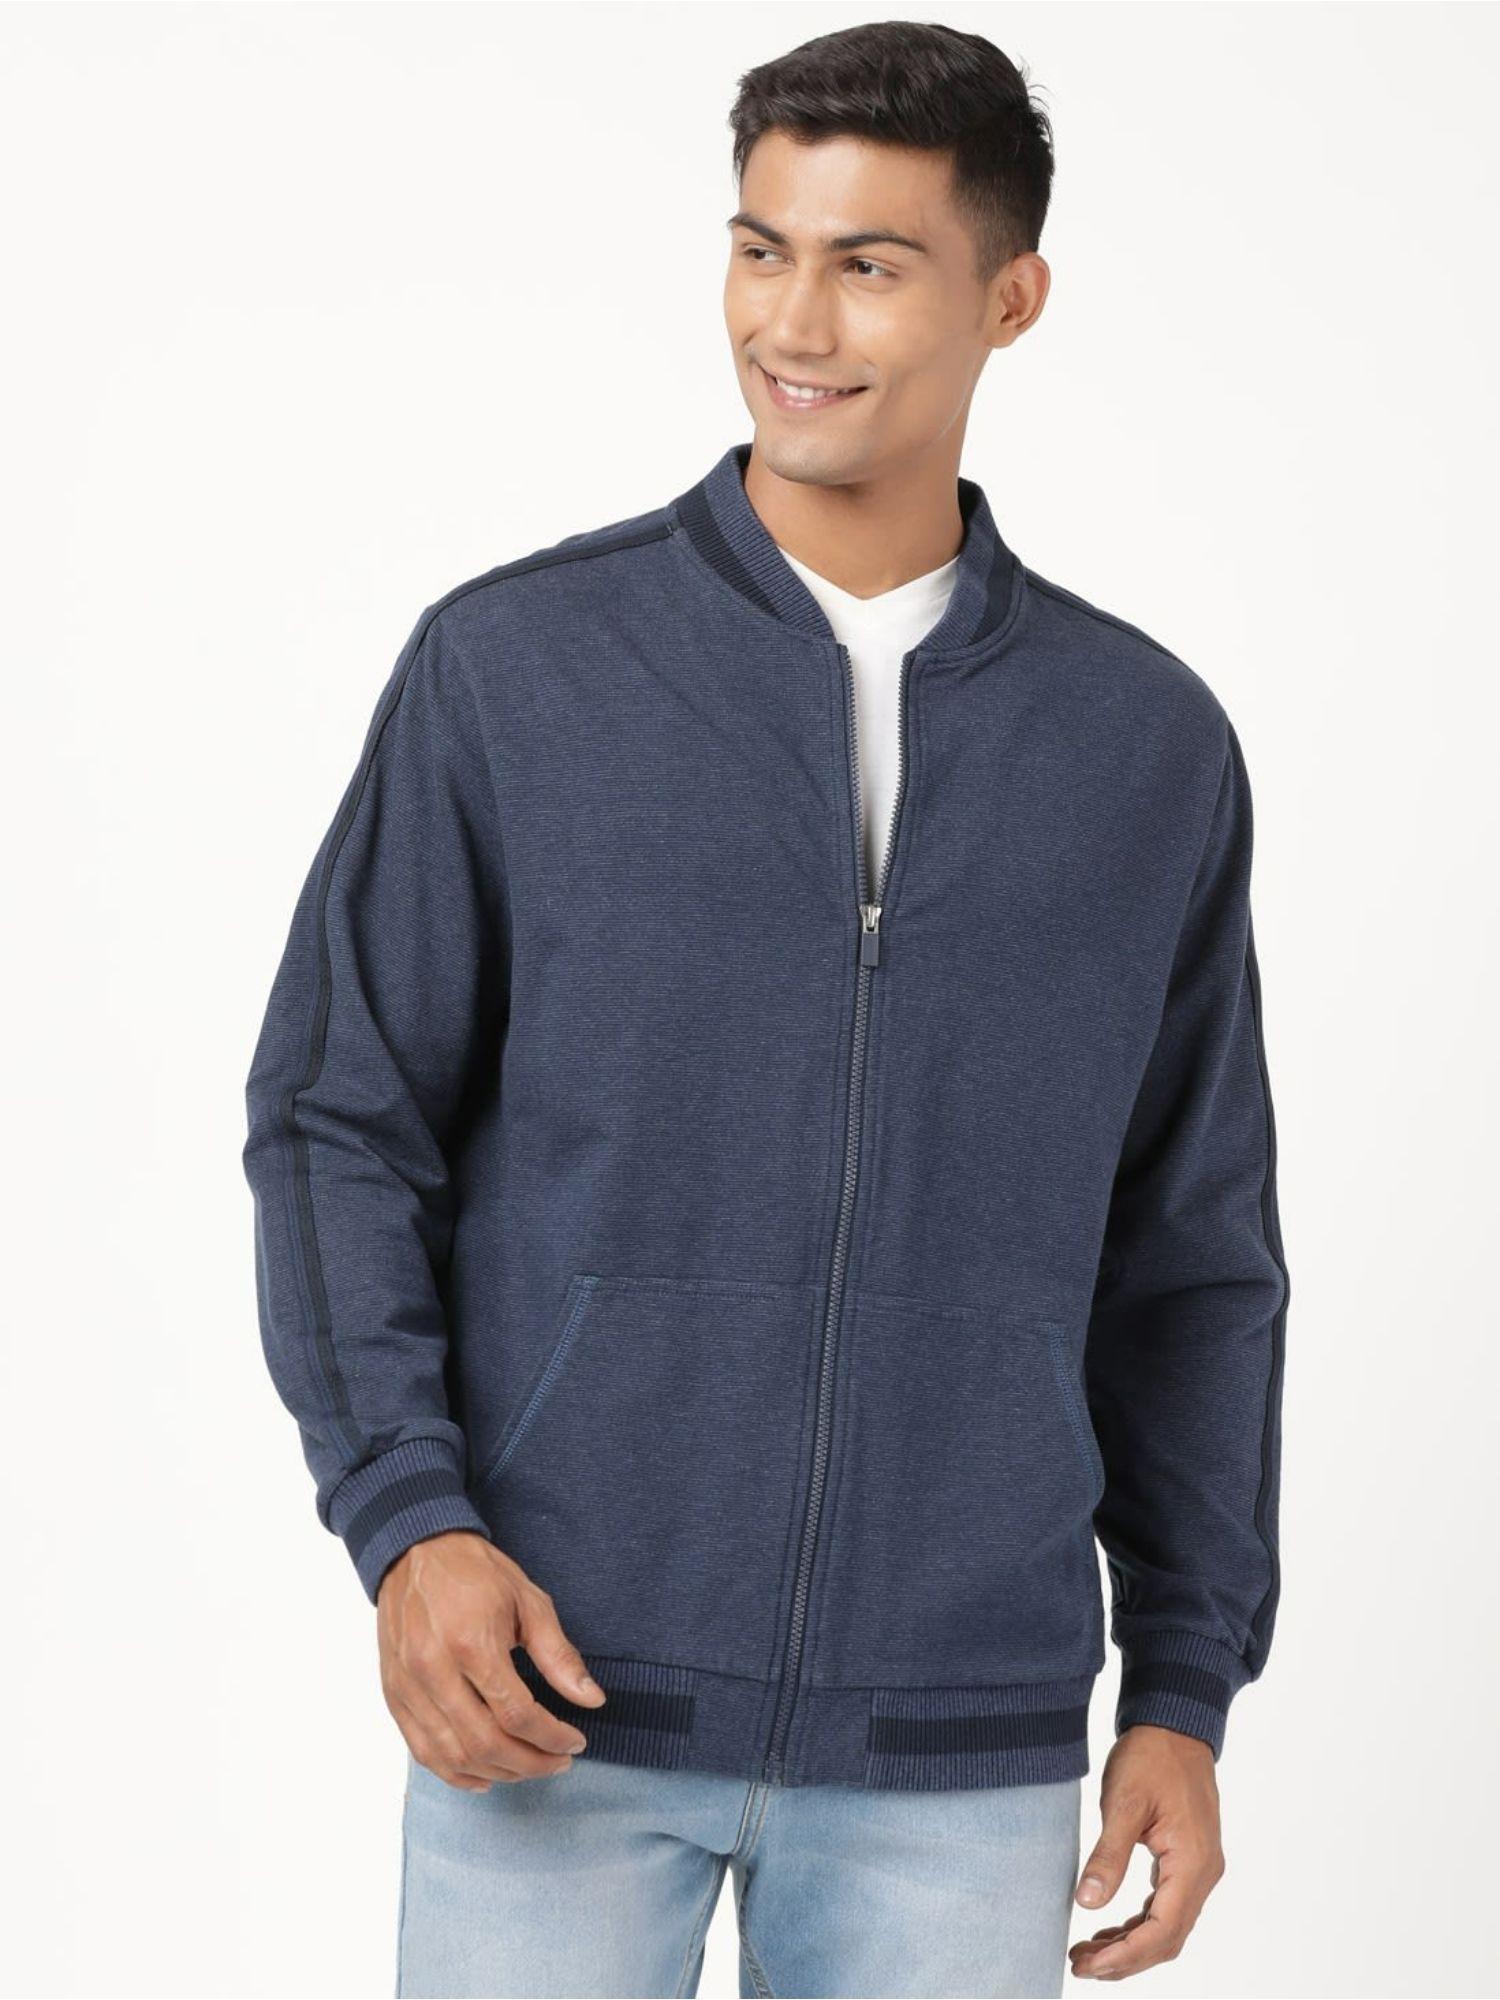 am92 mens cotton rich fleece fabric jacket with stay warm treatment-blue